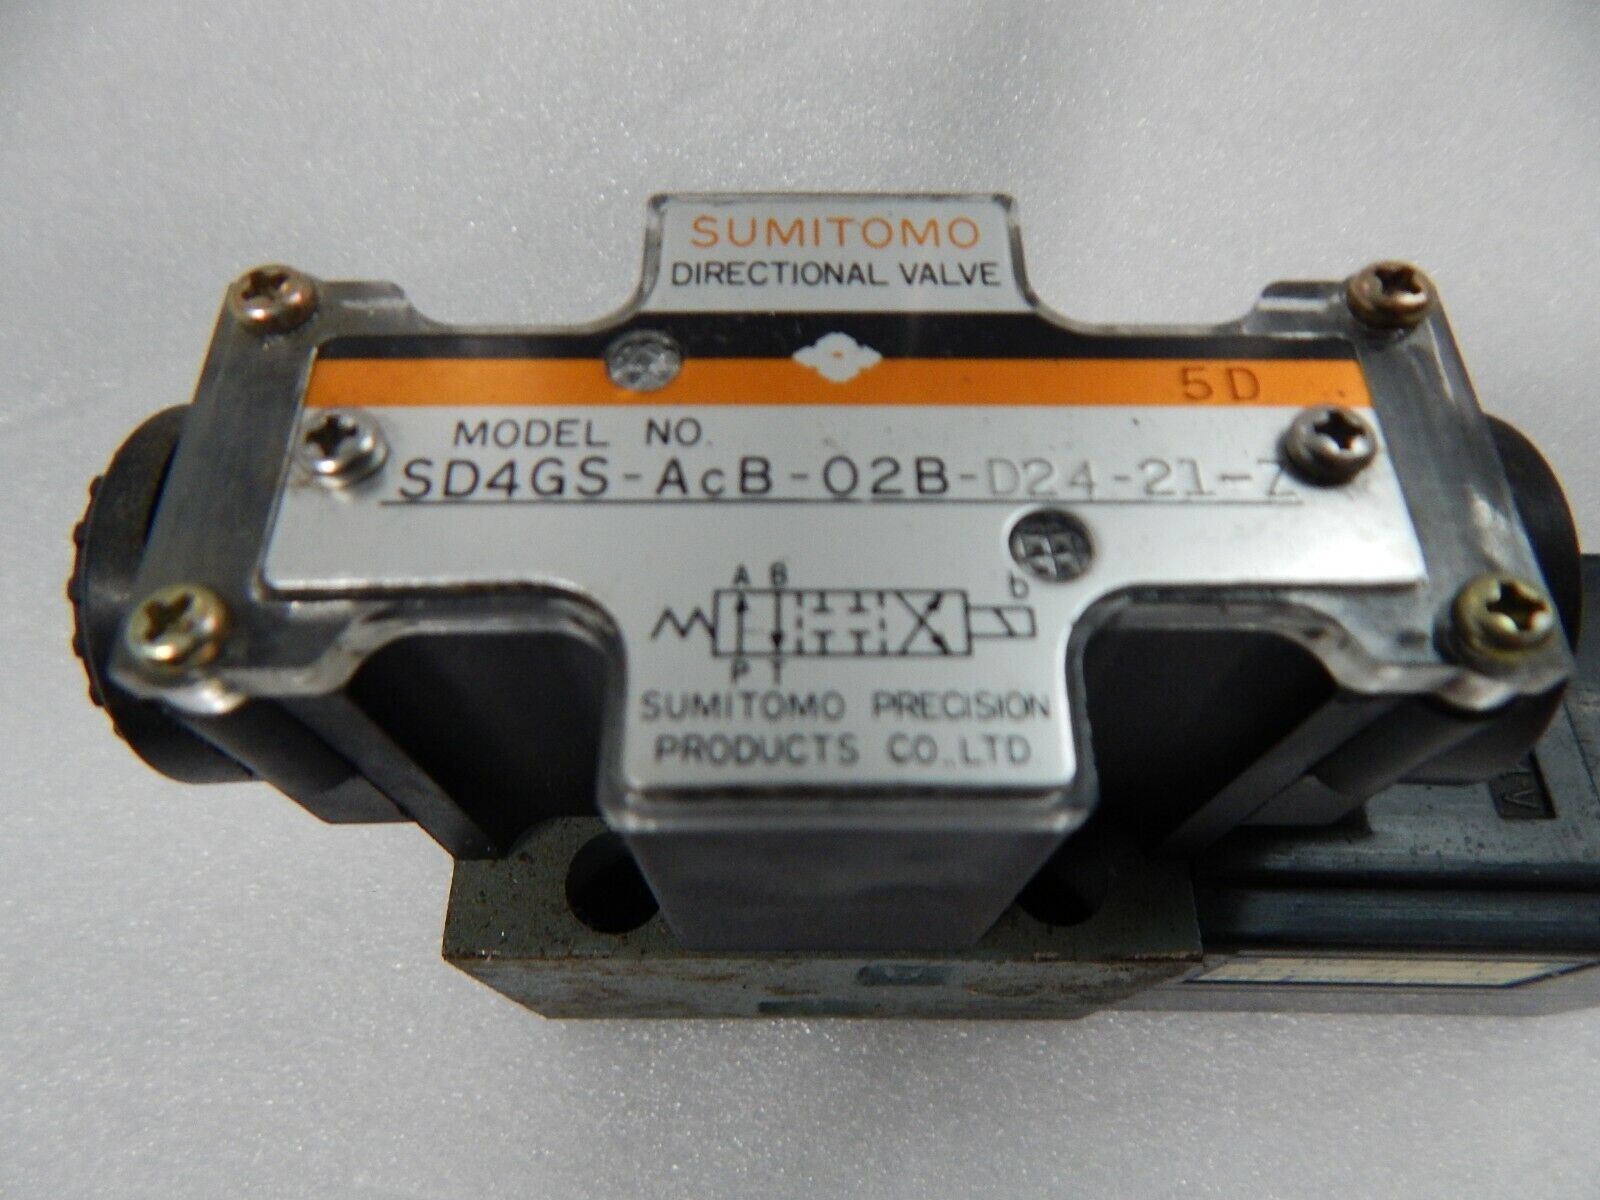 Sumitomo SD4GS-AcB-02B-D24-21-Z WD-21B-07 Directional Valve 24VDC Solenoid